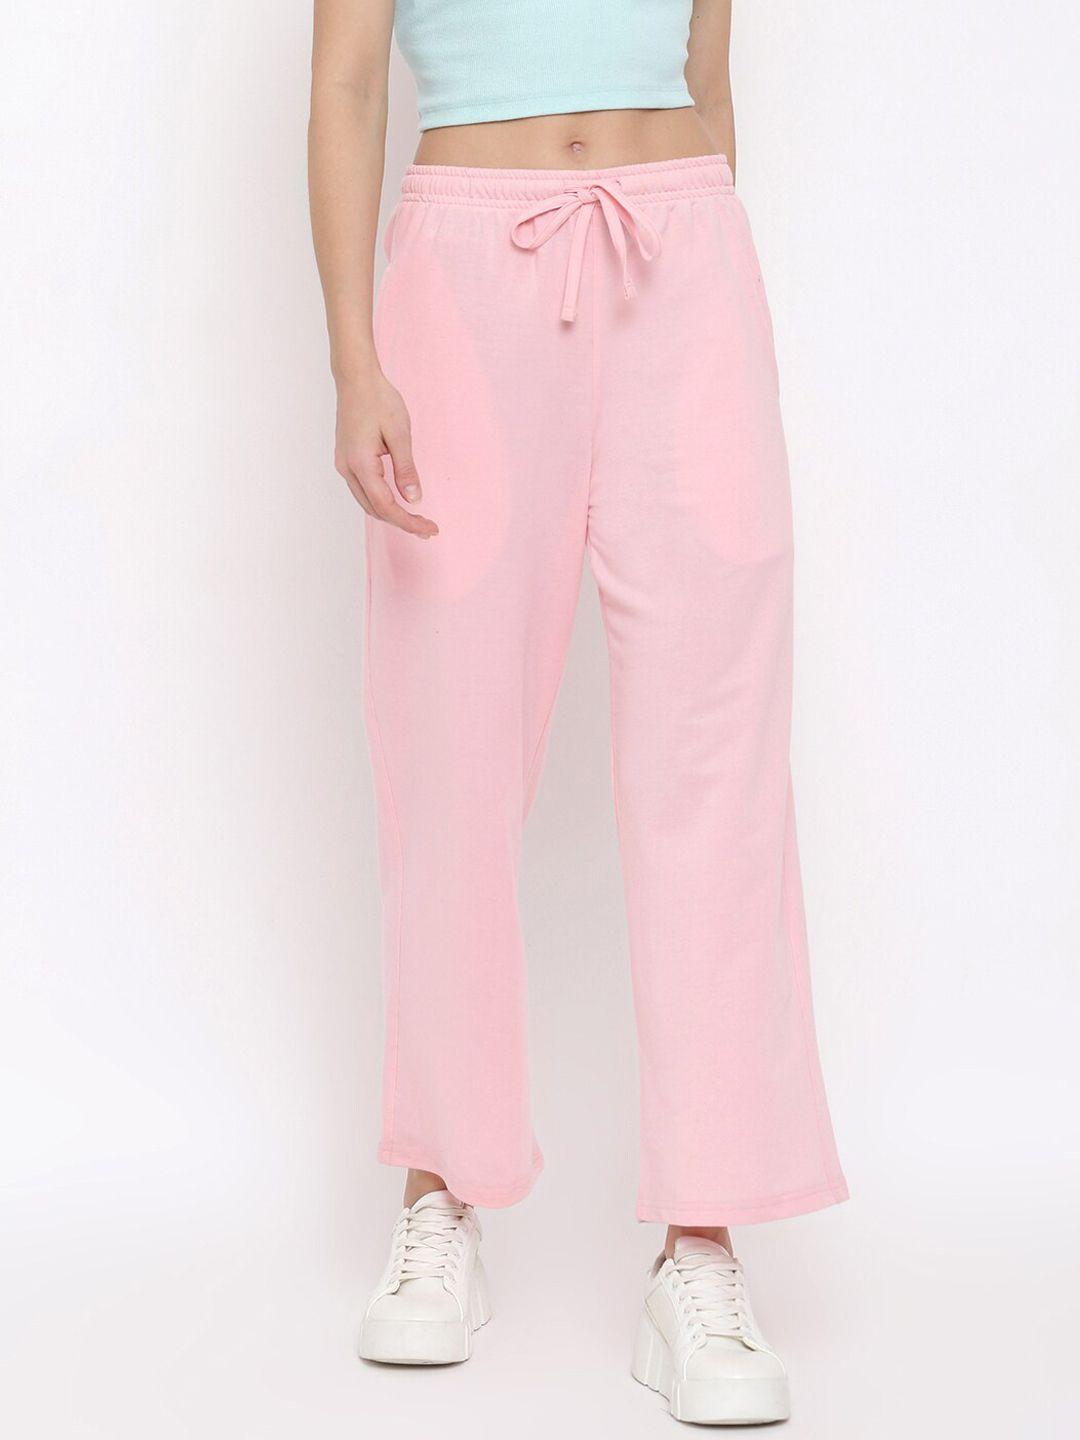 mkh women pink solid track pants